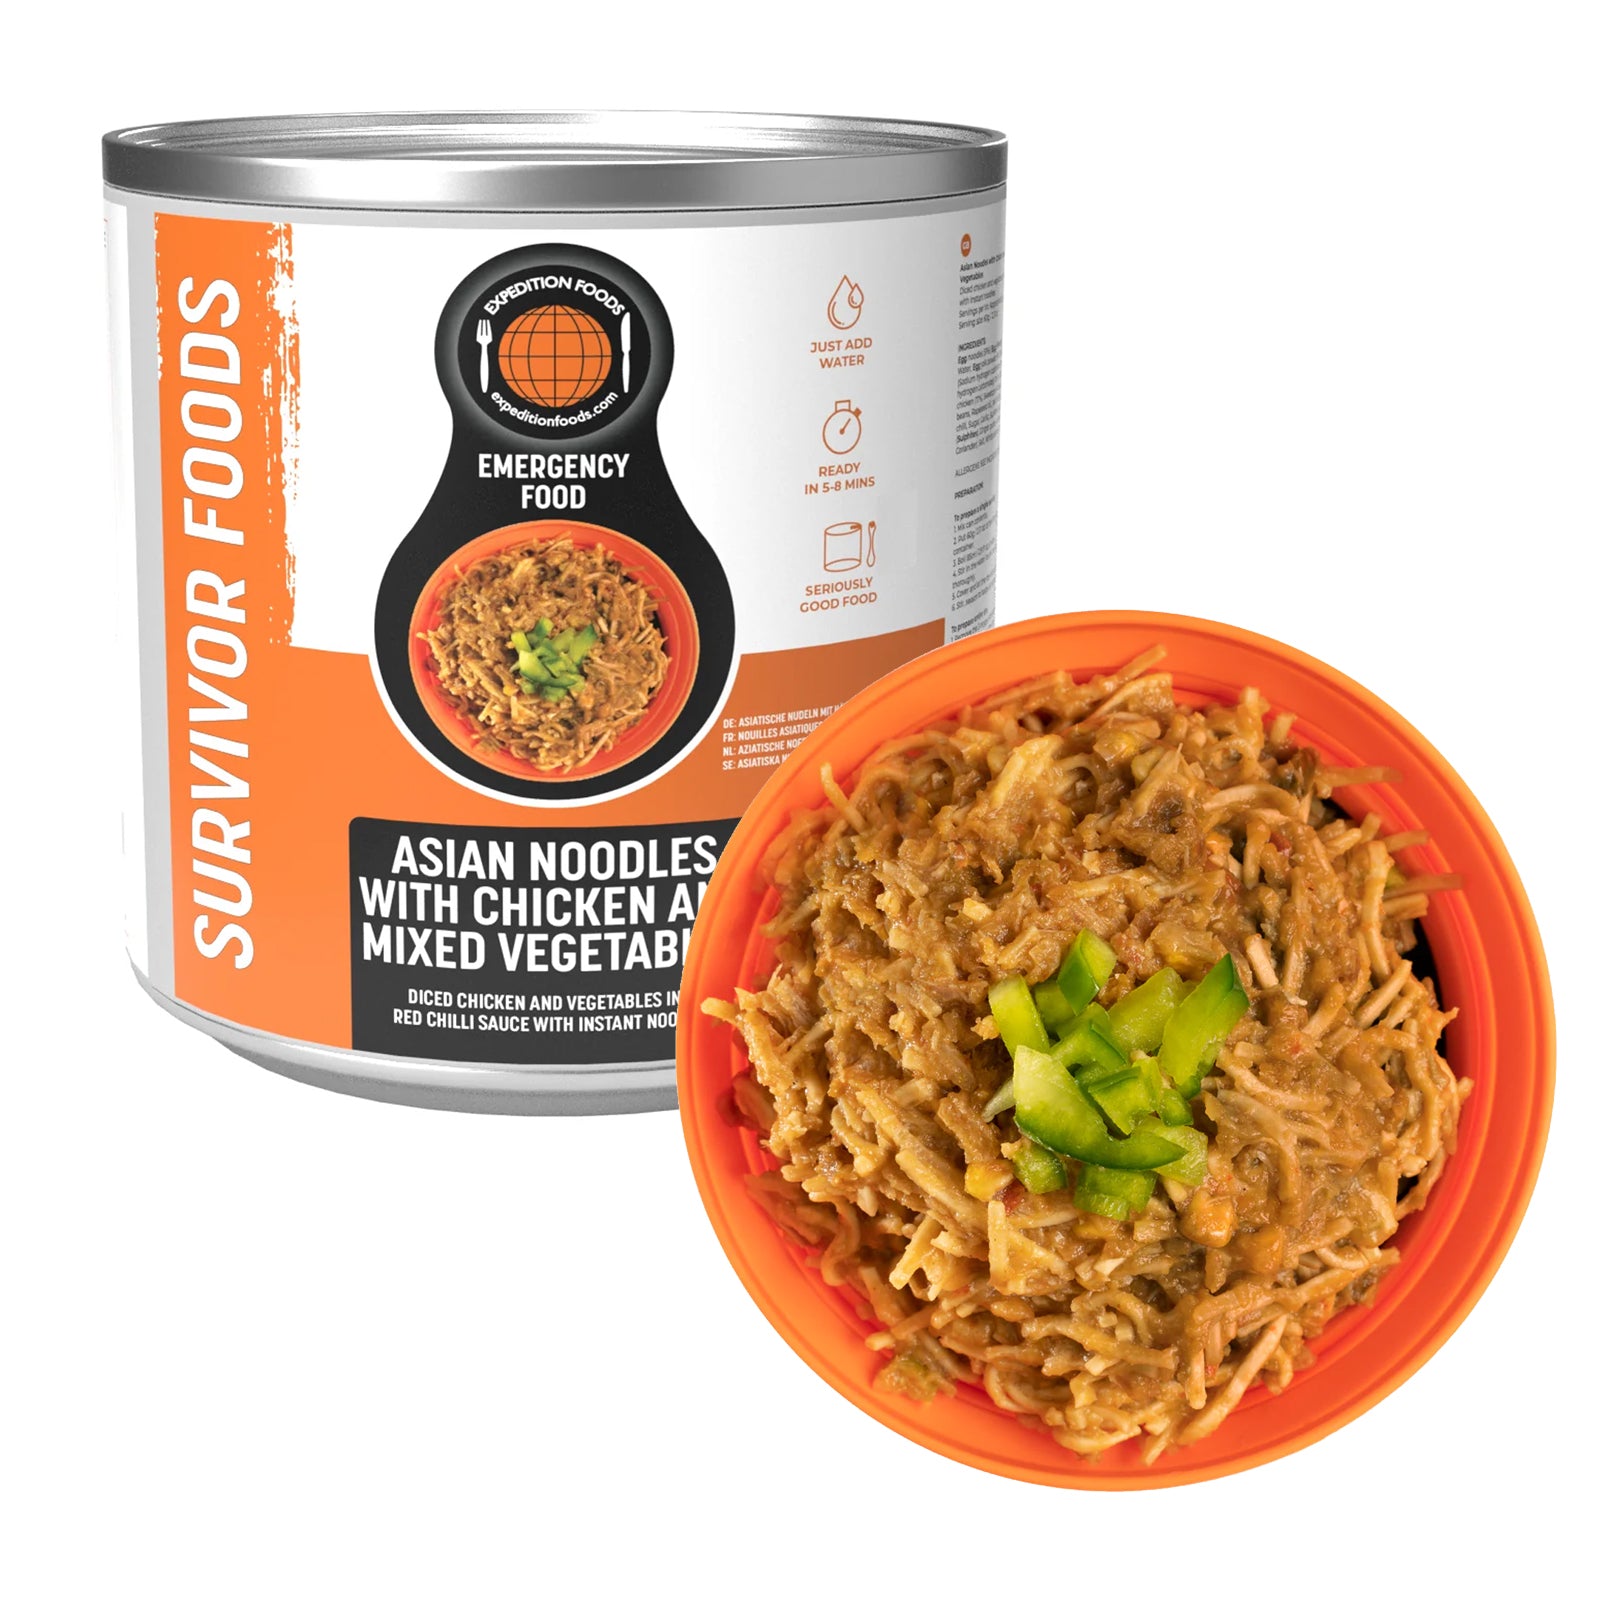 Expedition Foods Asian Noodles with Chicken & Veg